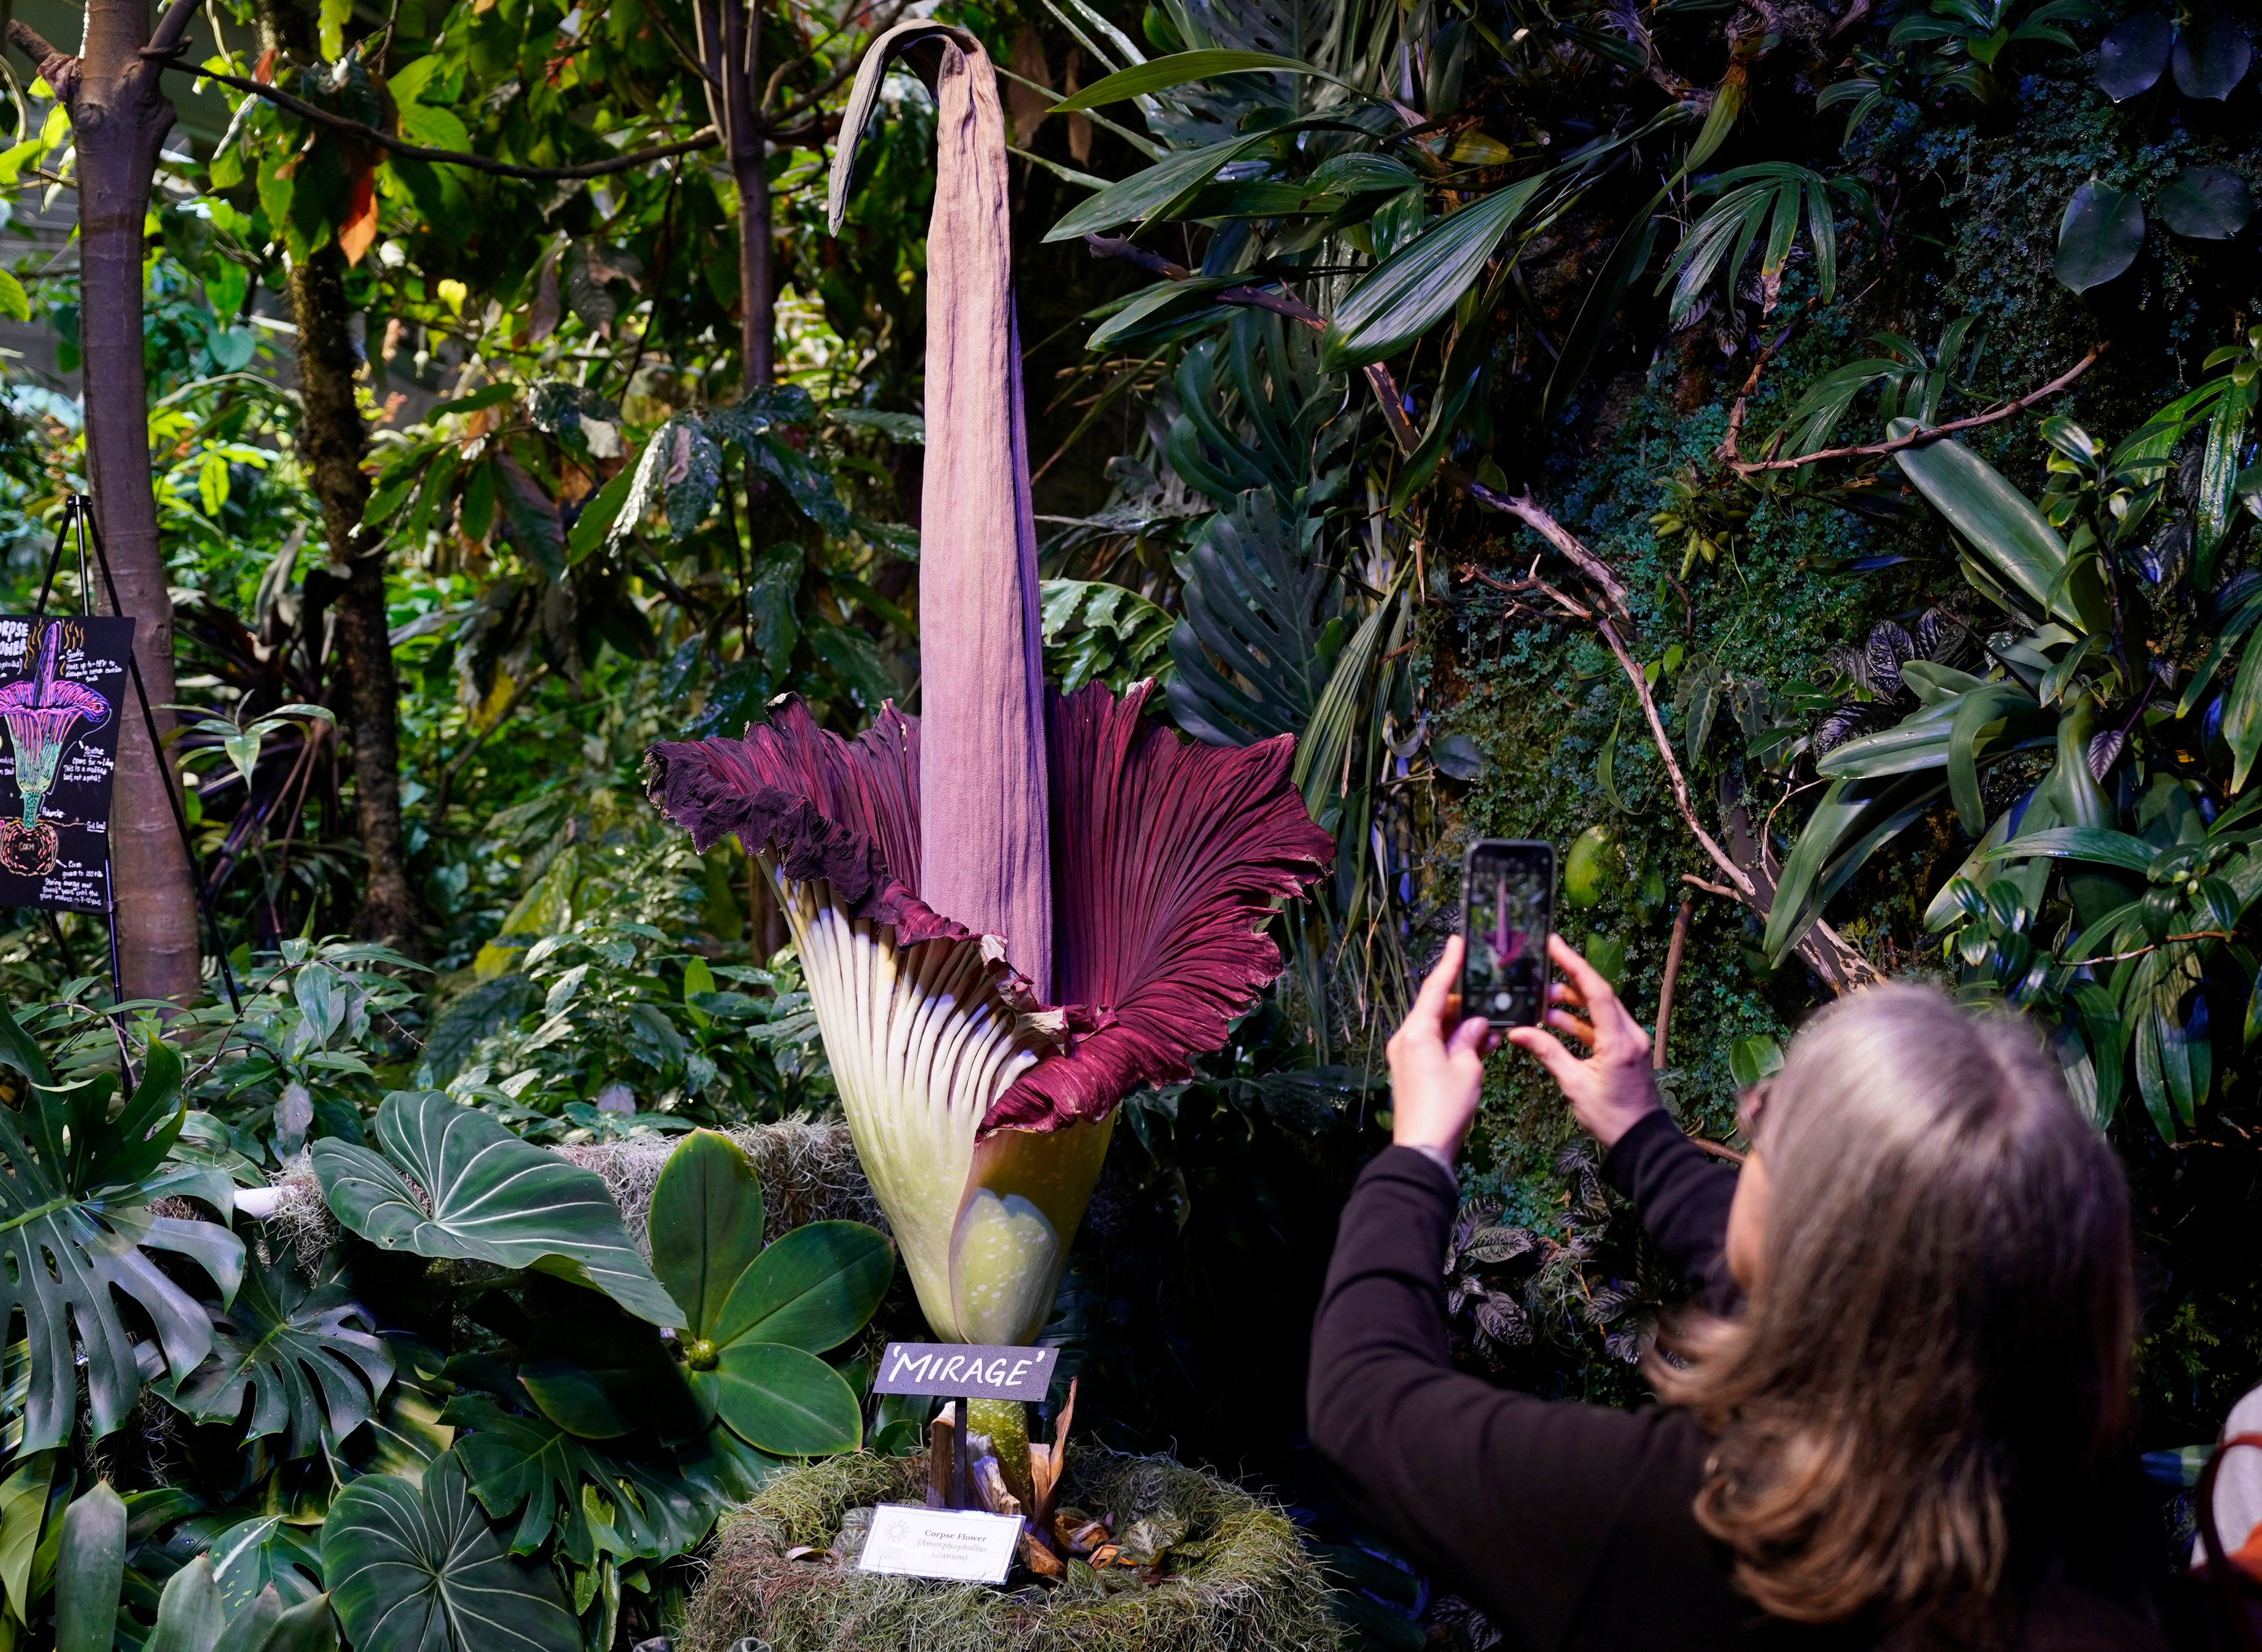 People line up to see the “corpse flower,” which emits a bad smell when it blooms, at a museum in San Francisco in the US. Photo: Xinhua